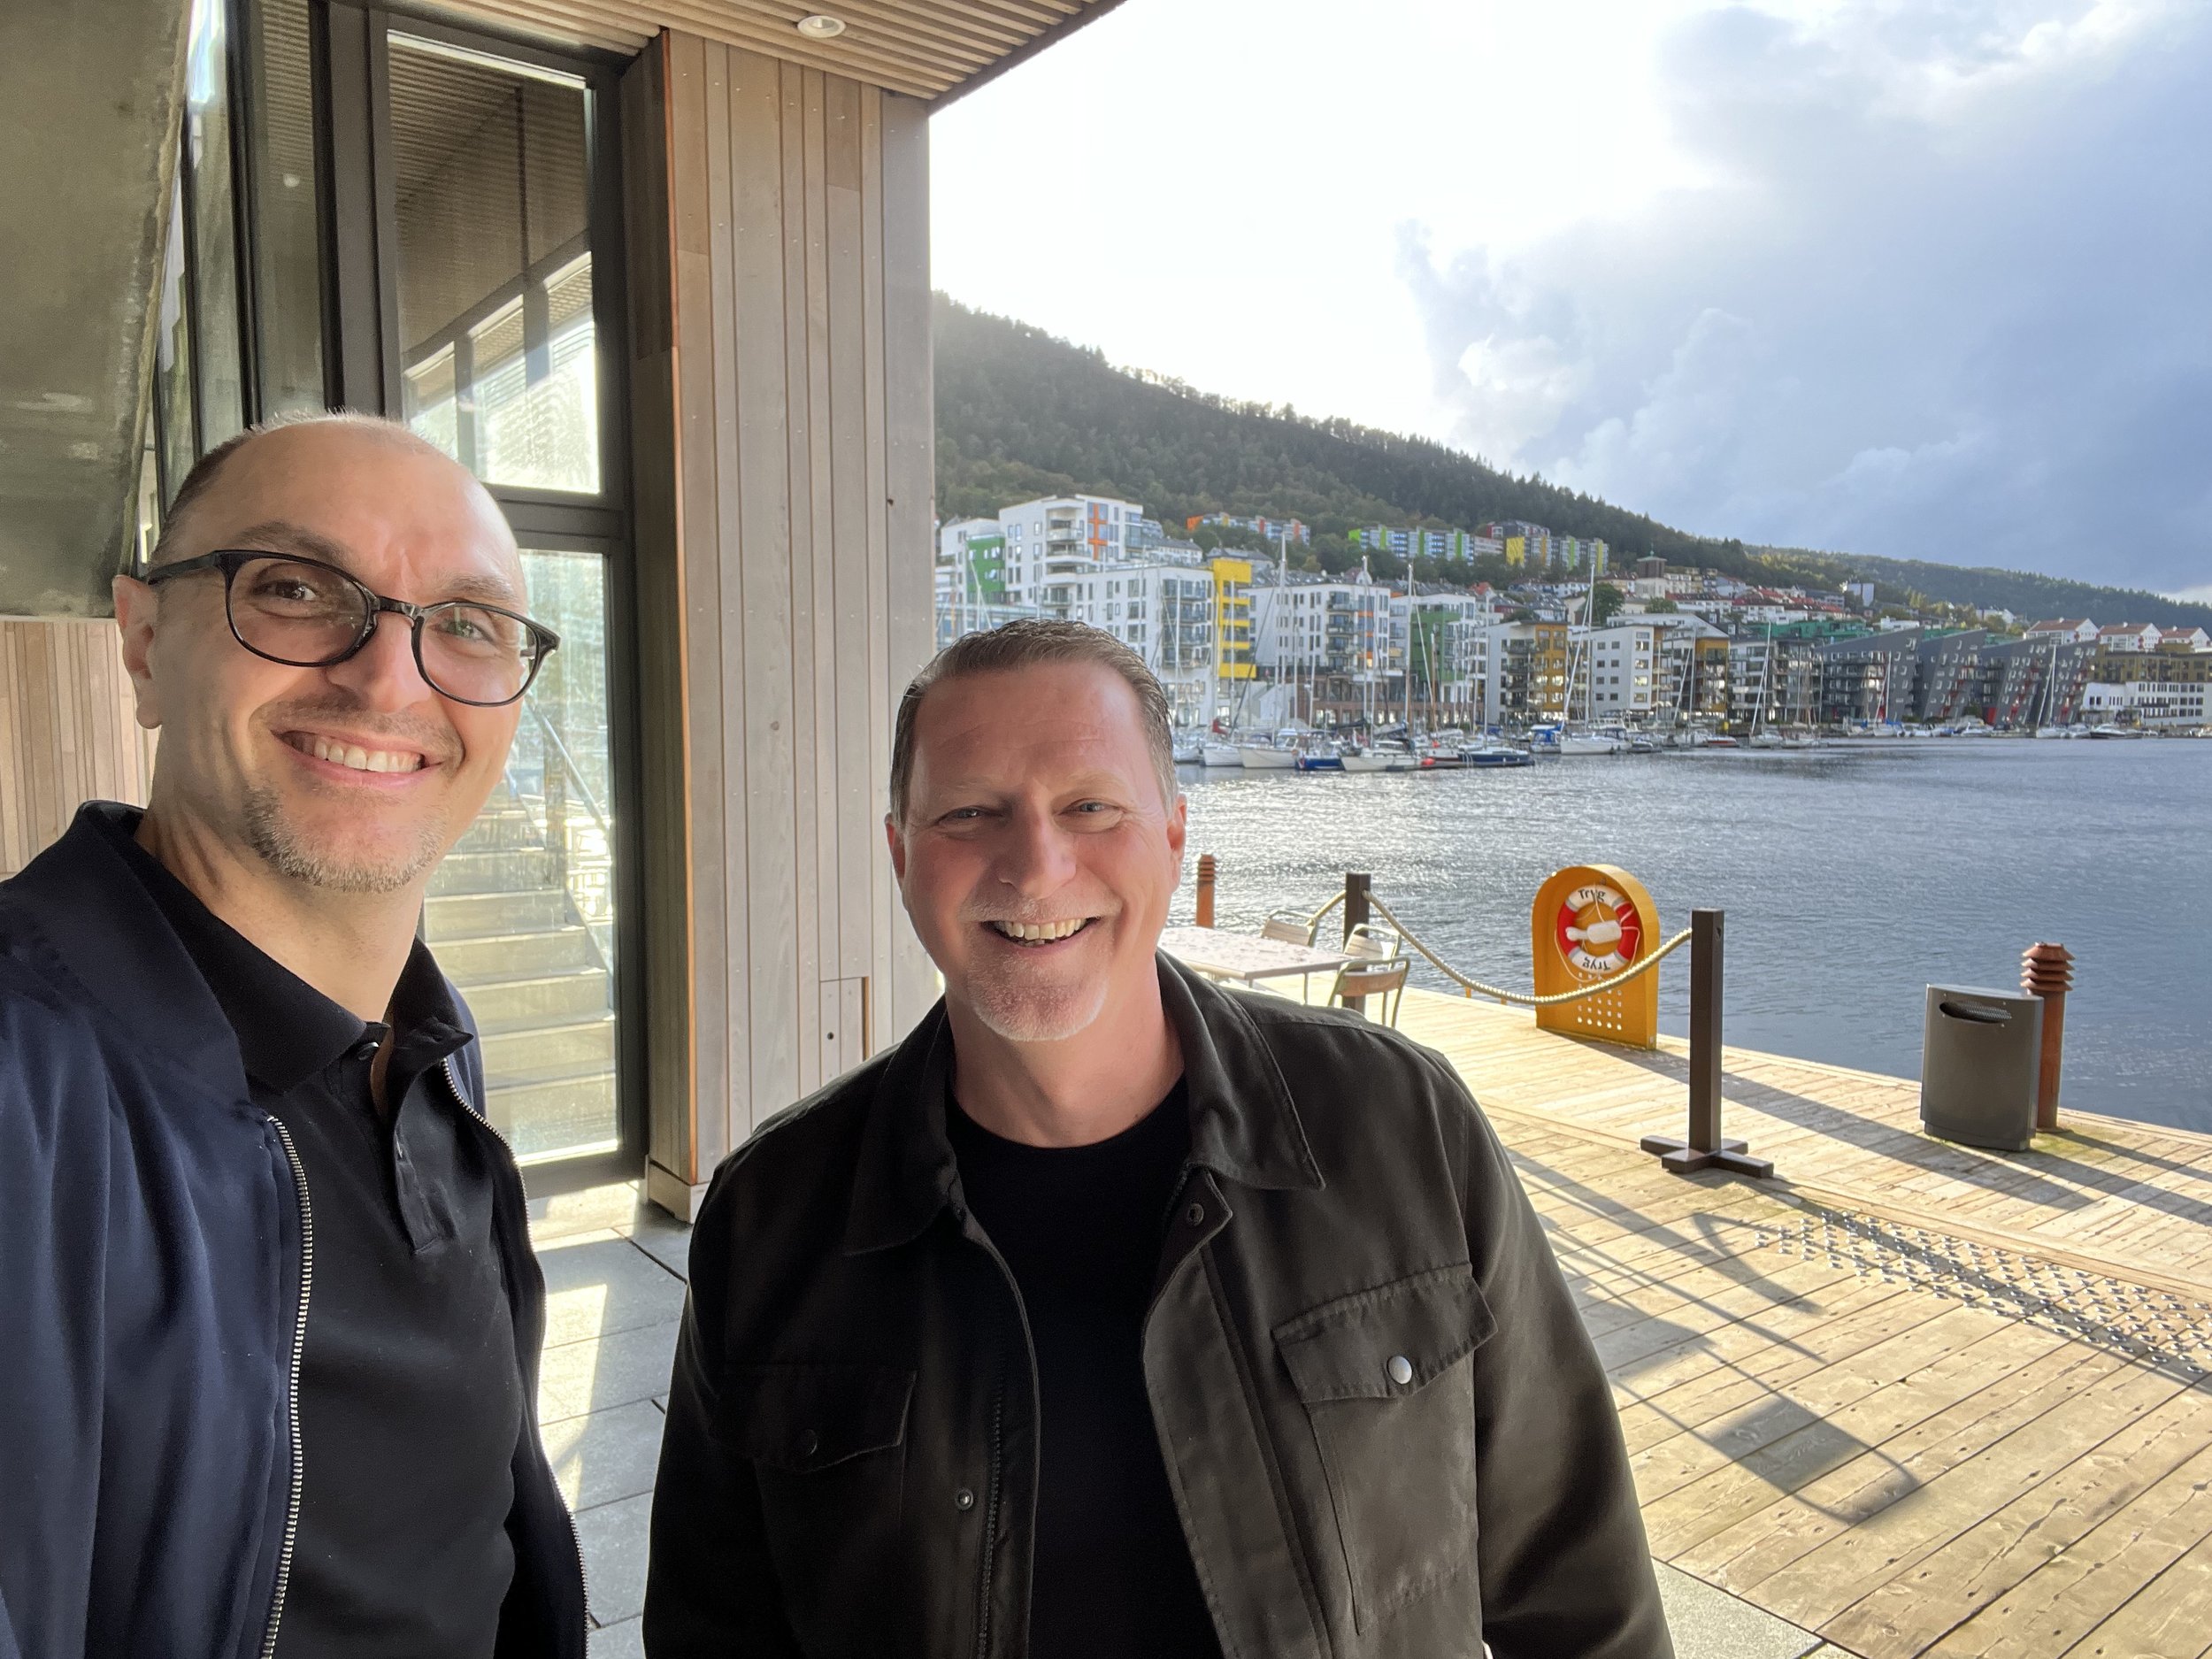 A ministry visit to Norway and Denmark together with Larry Henderson, Europe Regional Director